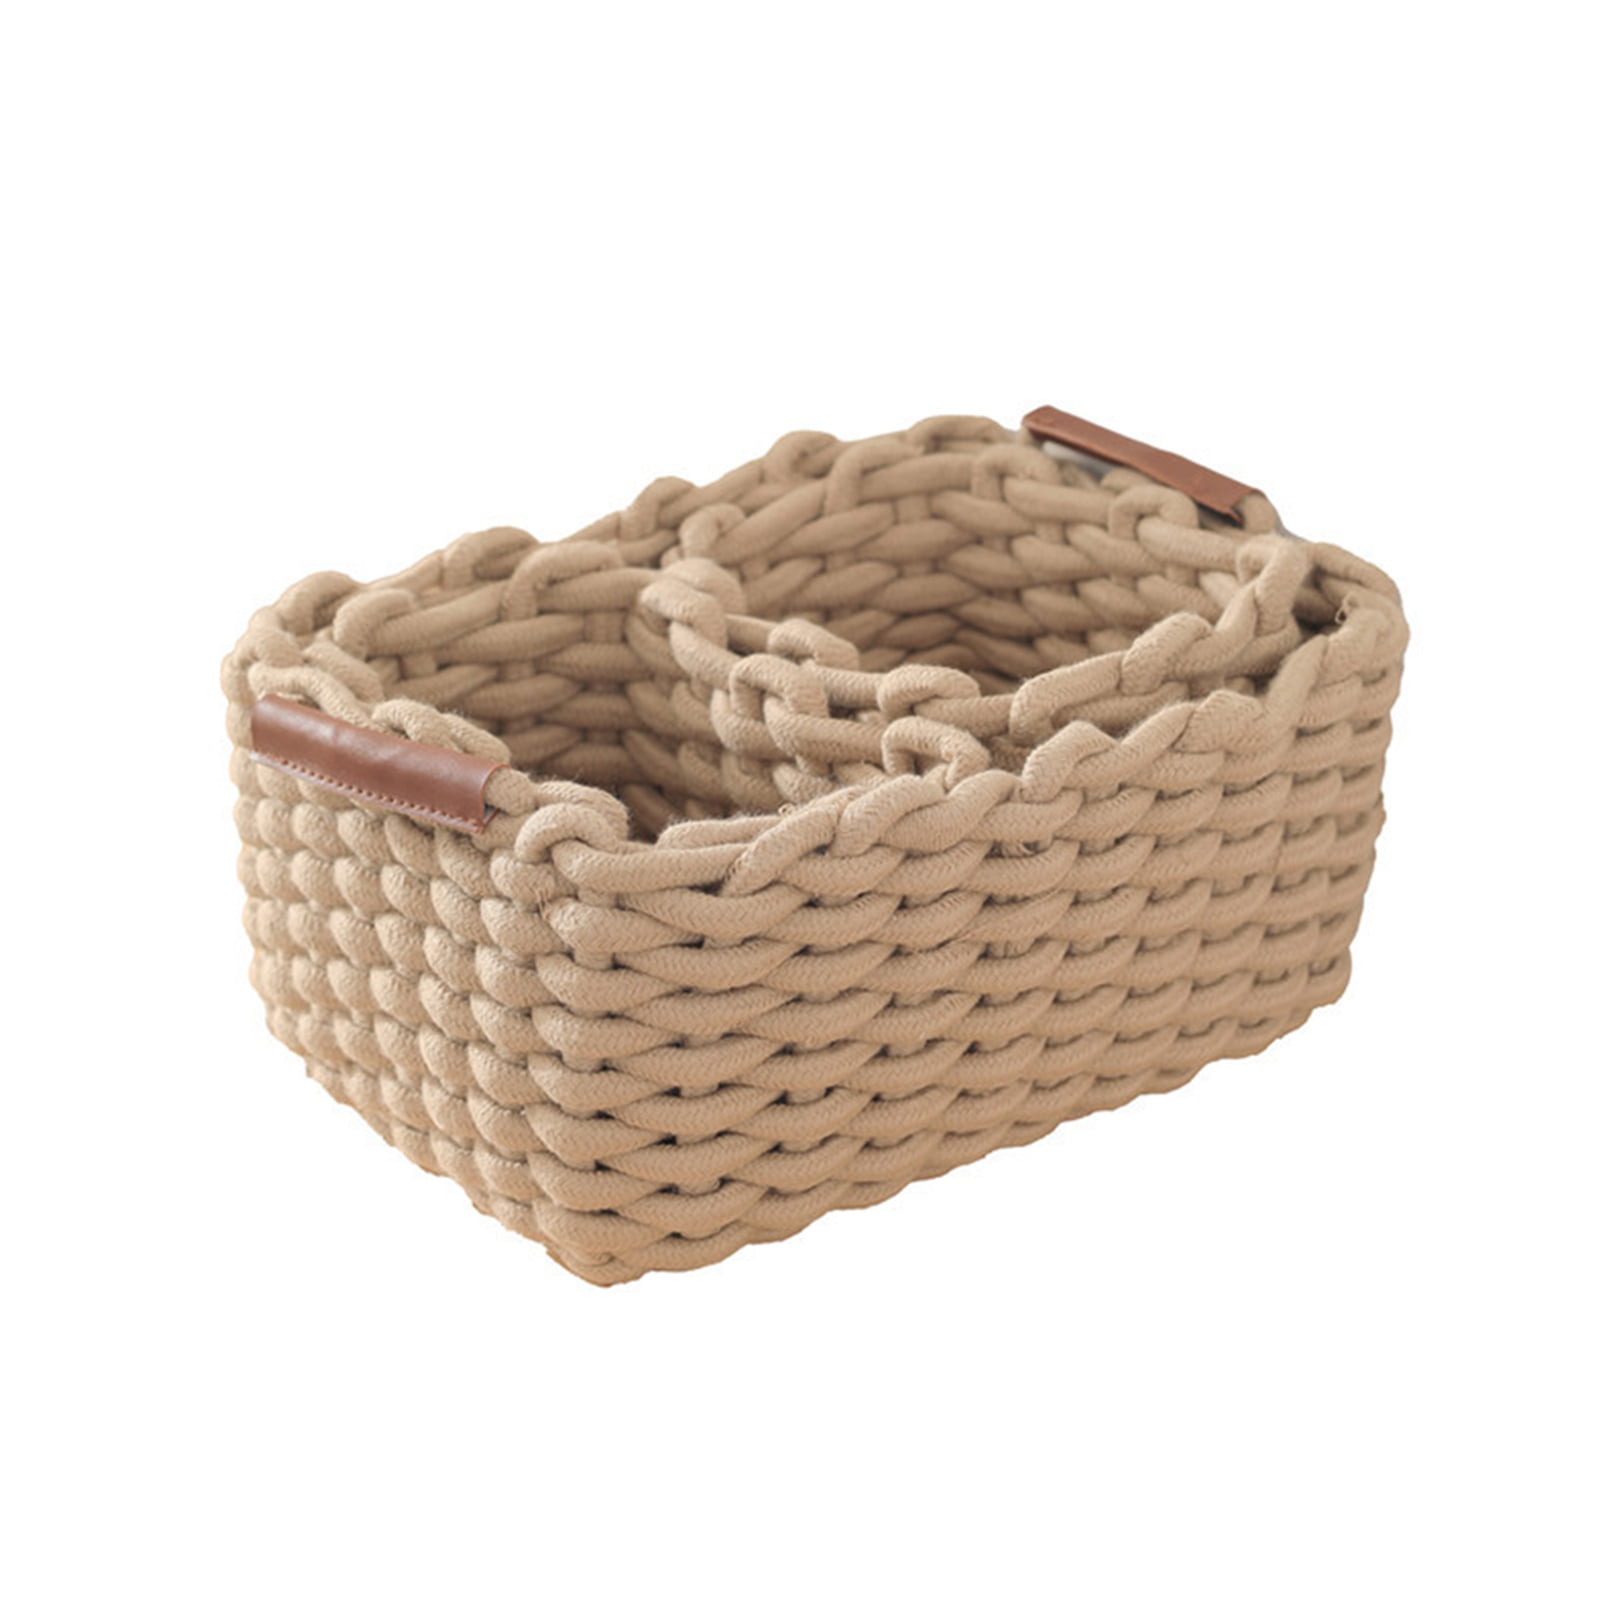 Detailed Red Brown And Tan Looped Woven Basket with Handle Small Collection Storage Decor Wicker Basket